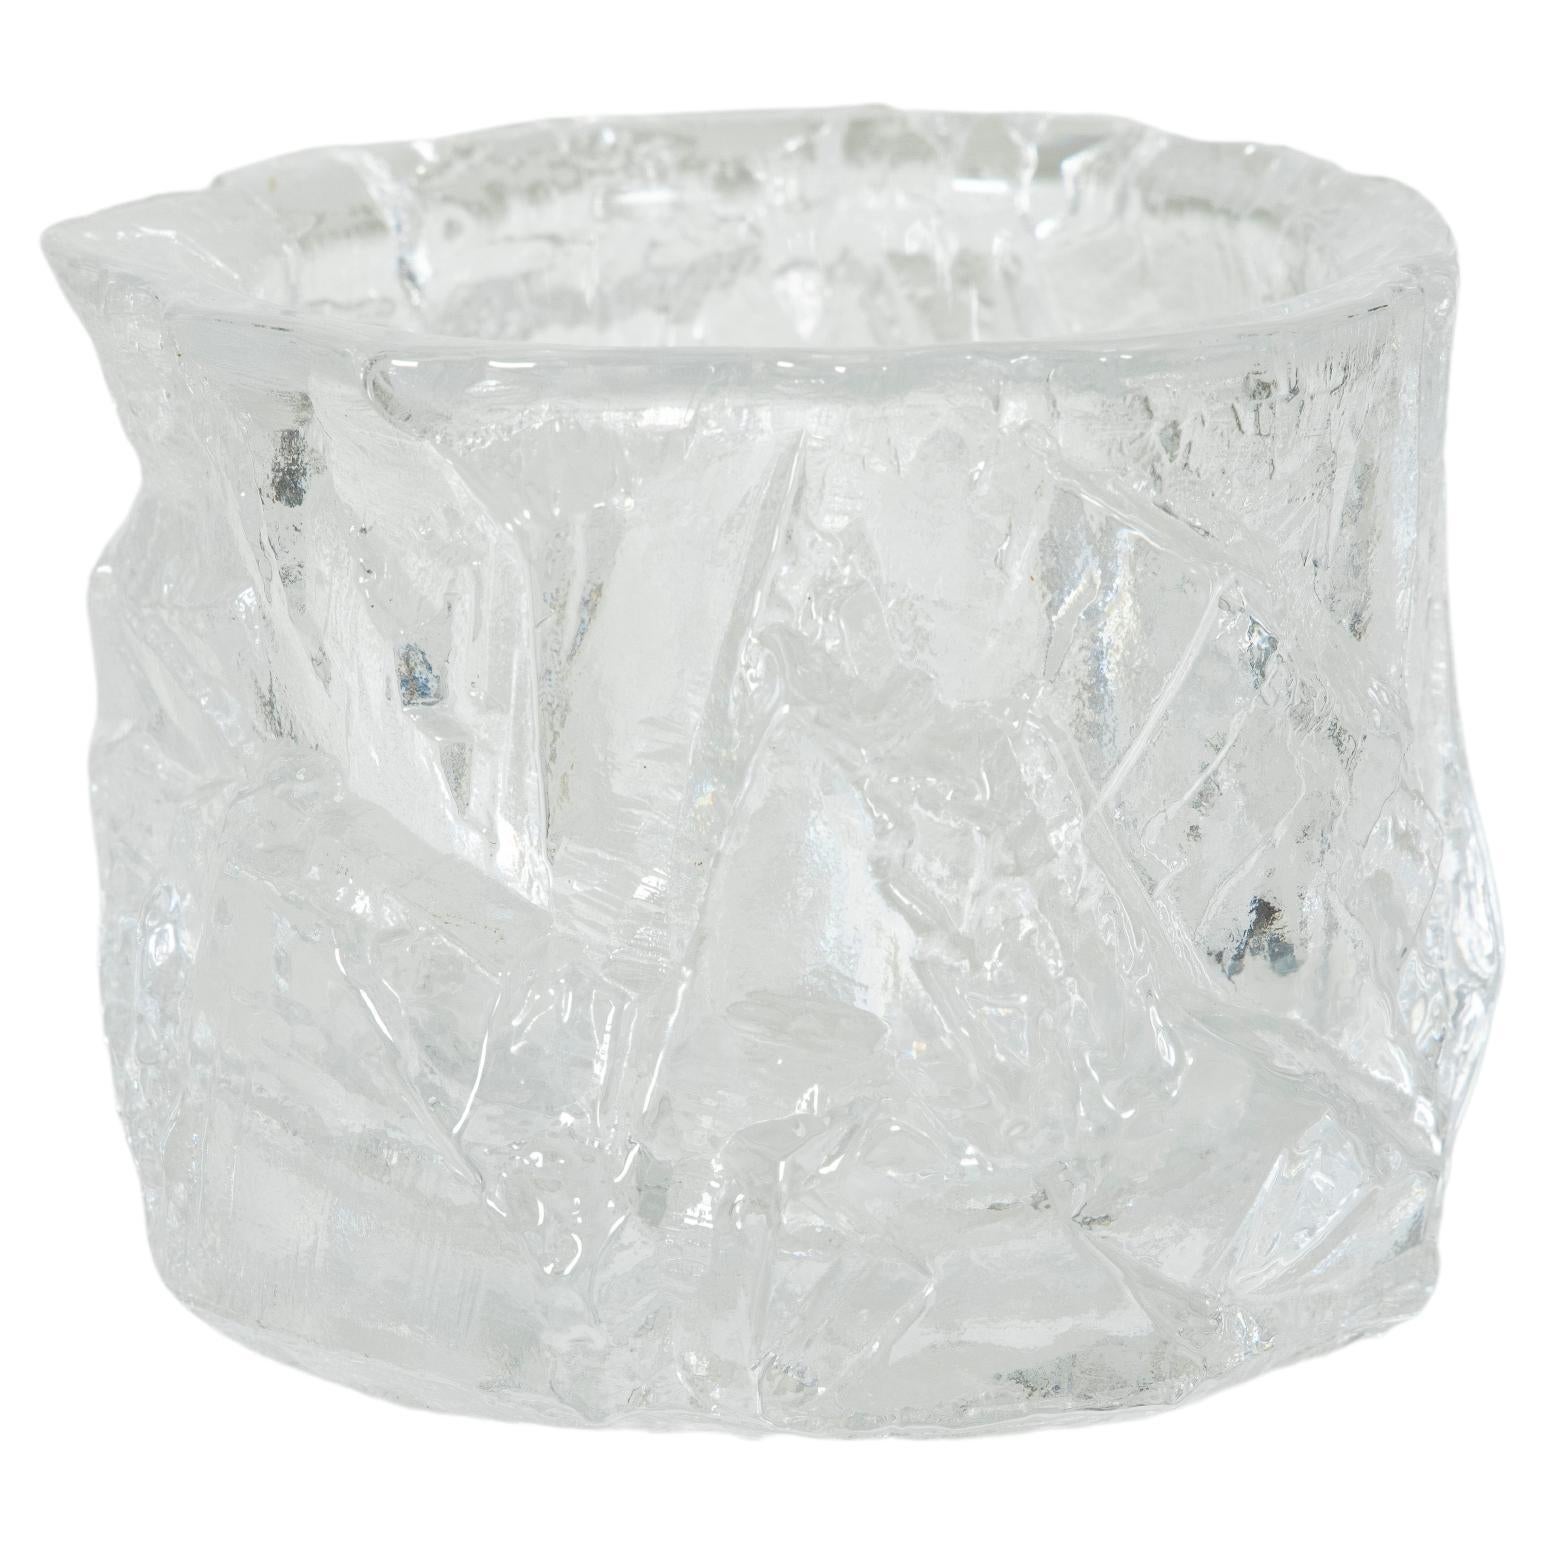 Ice Crystals Effect Trinket Bowl in Daum's Crystal, France